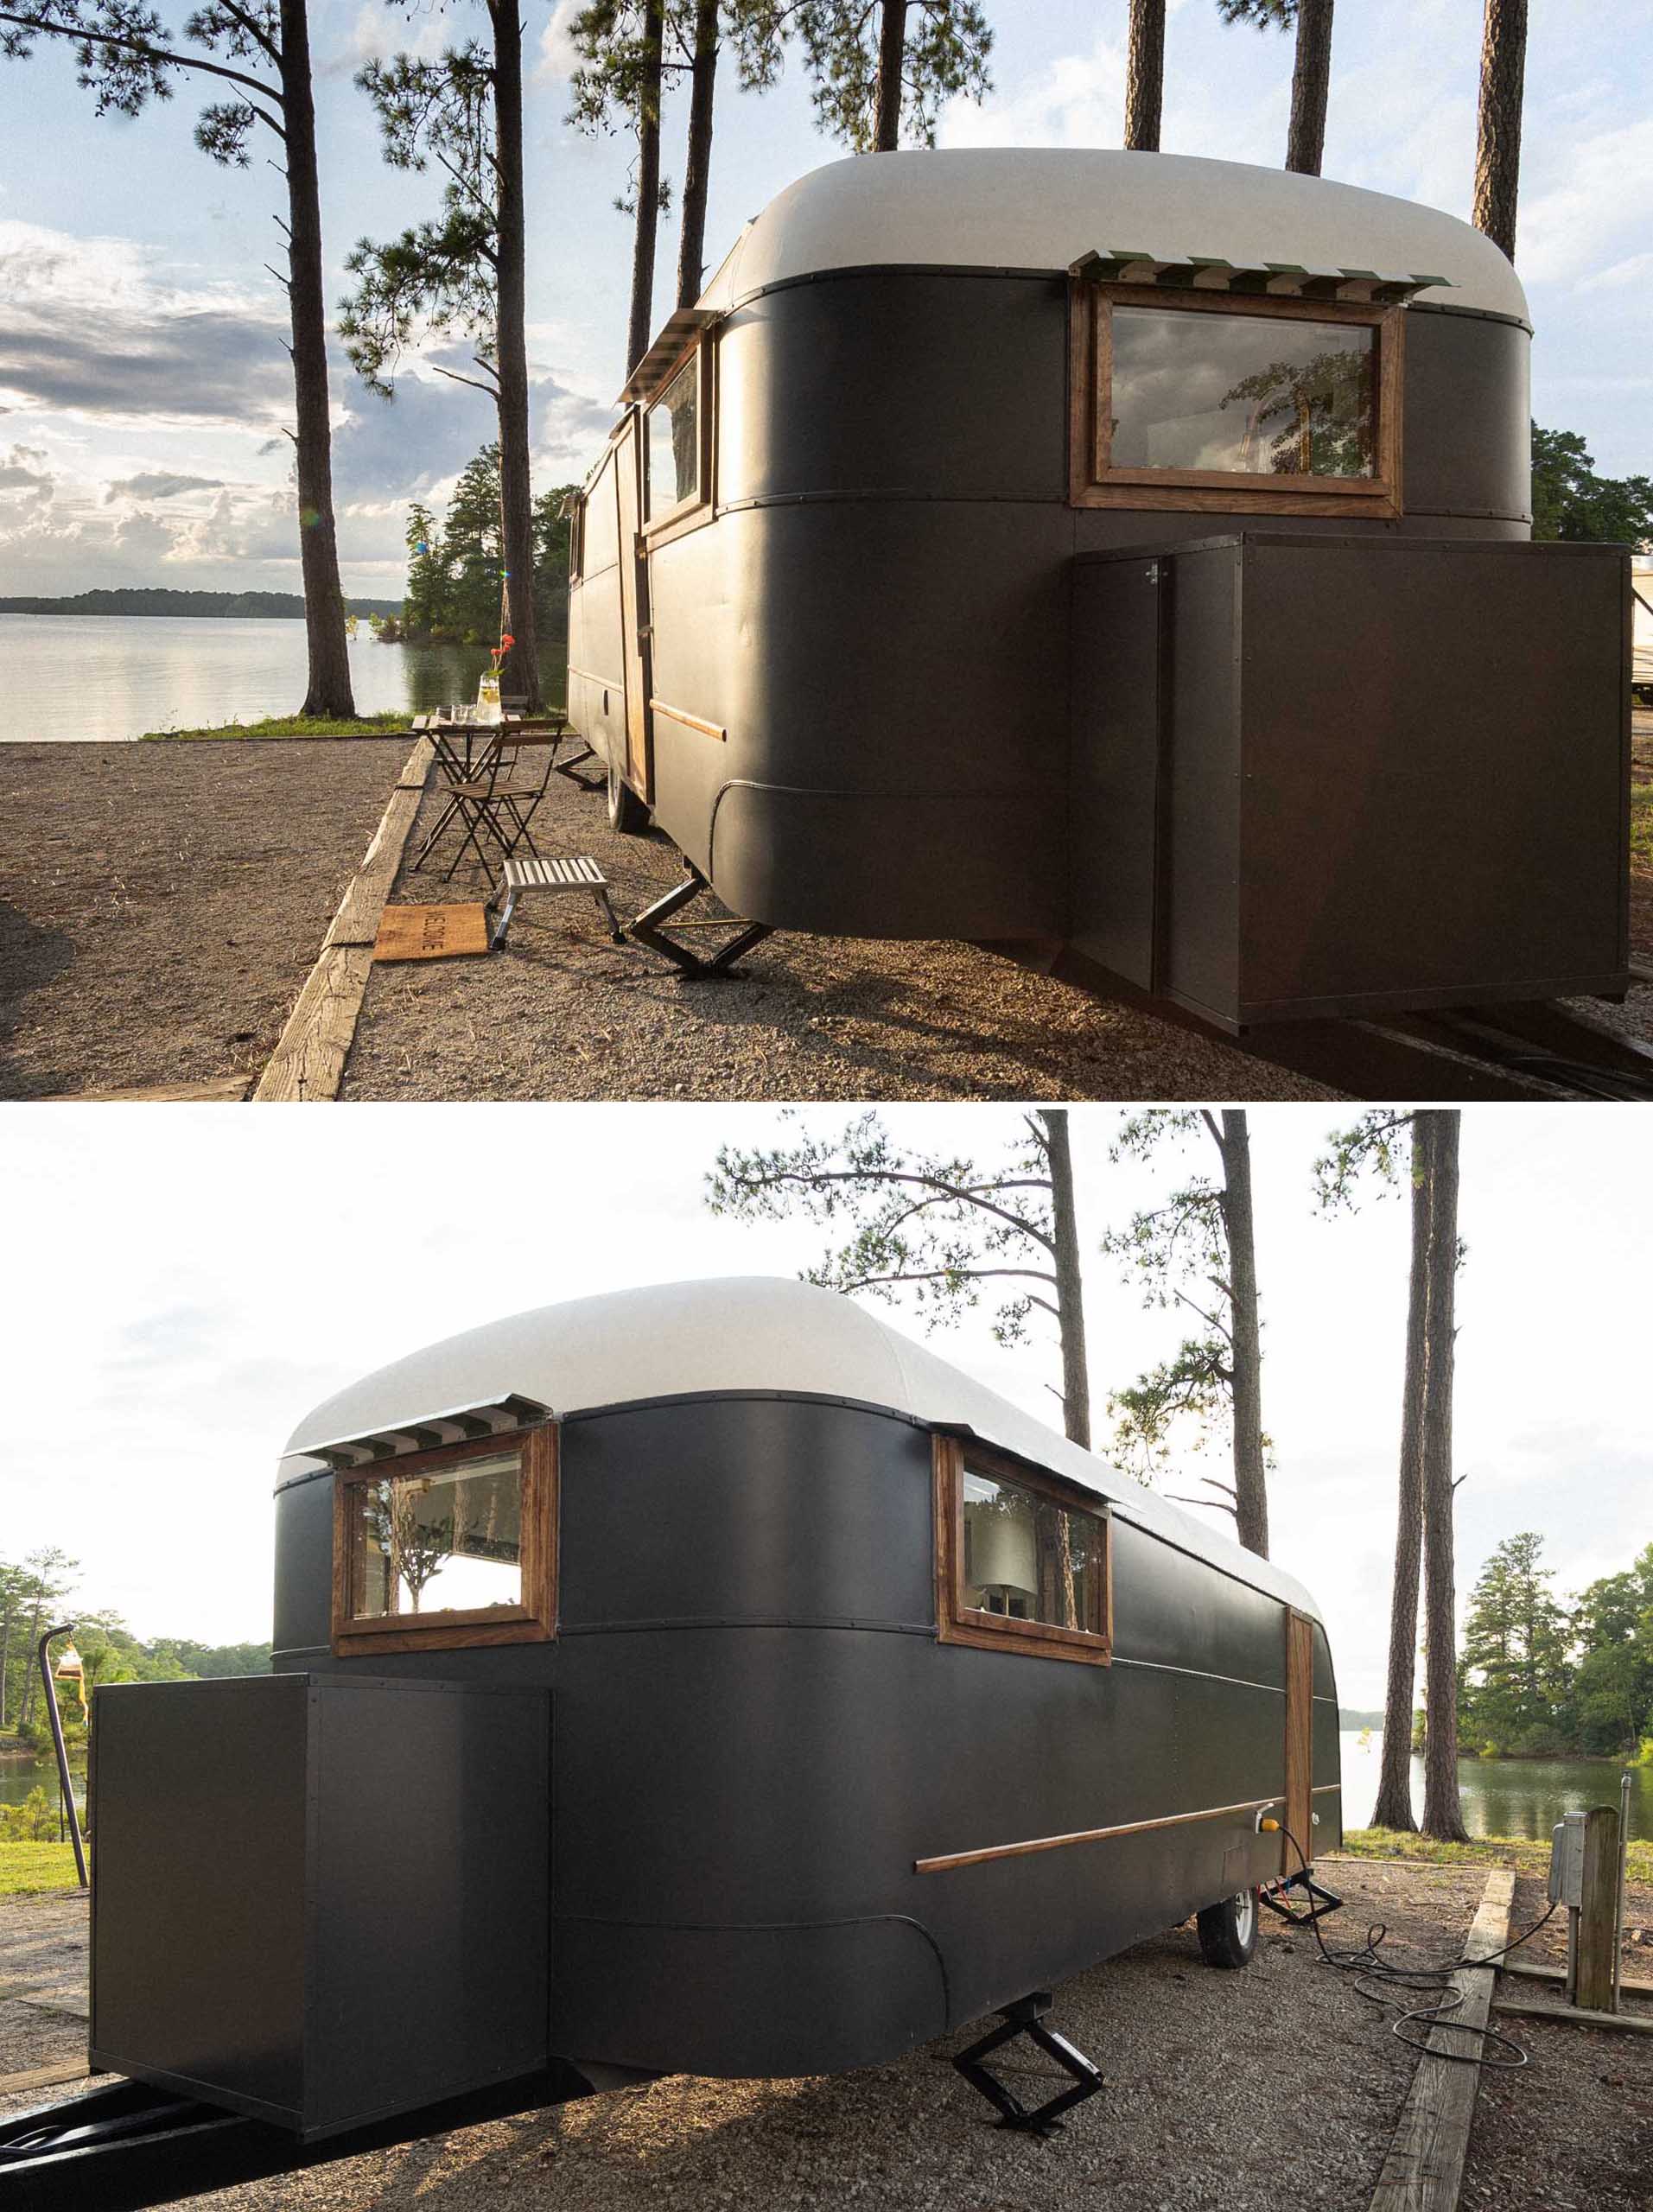 This remodeled vintage 1948 Vagabond 23 travel trailer includes matte black and white exterior with wood accents.